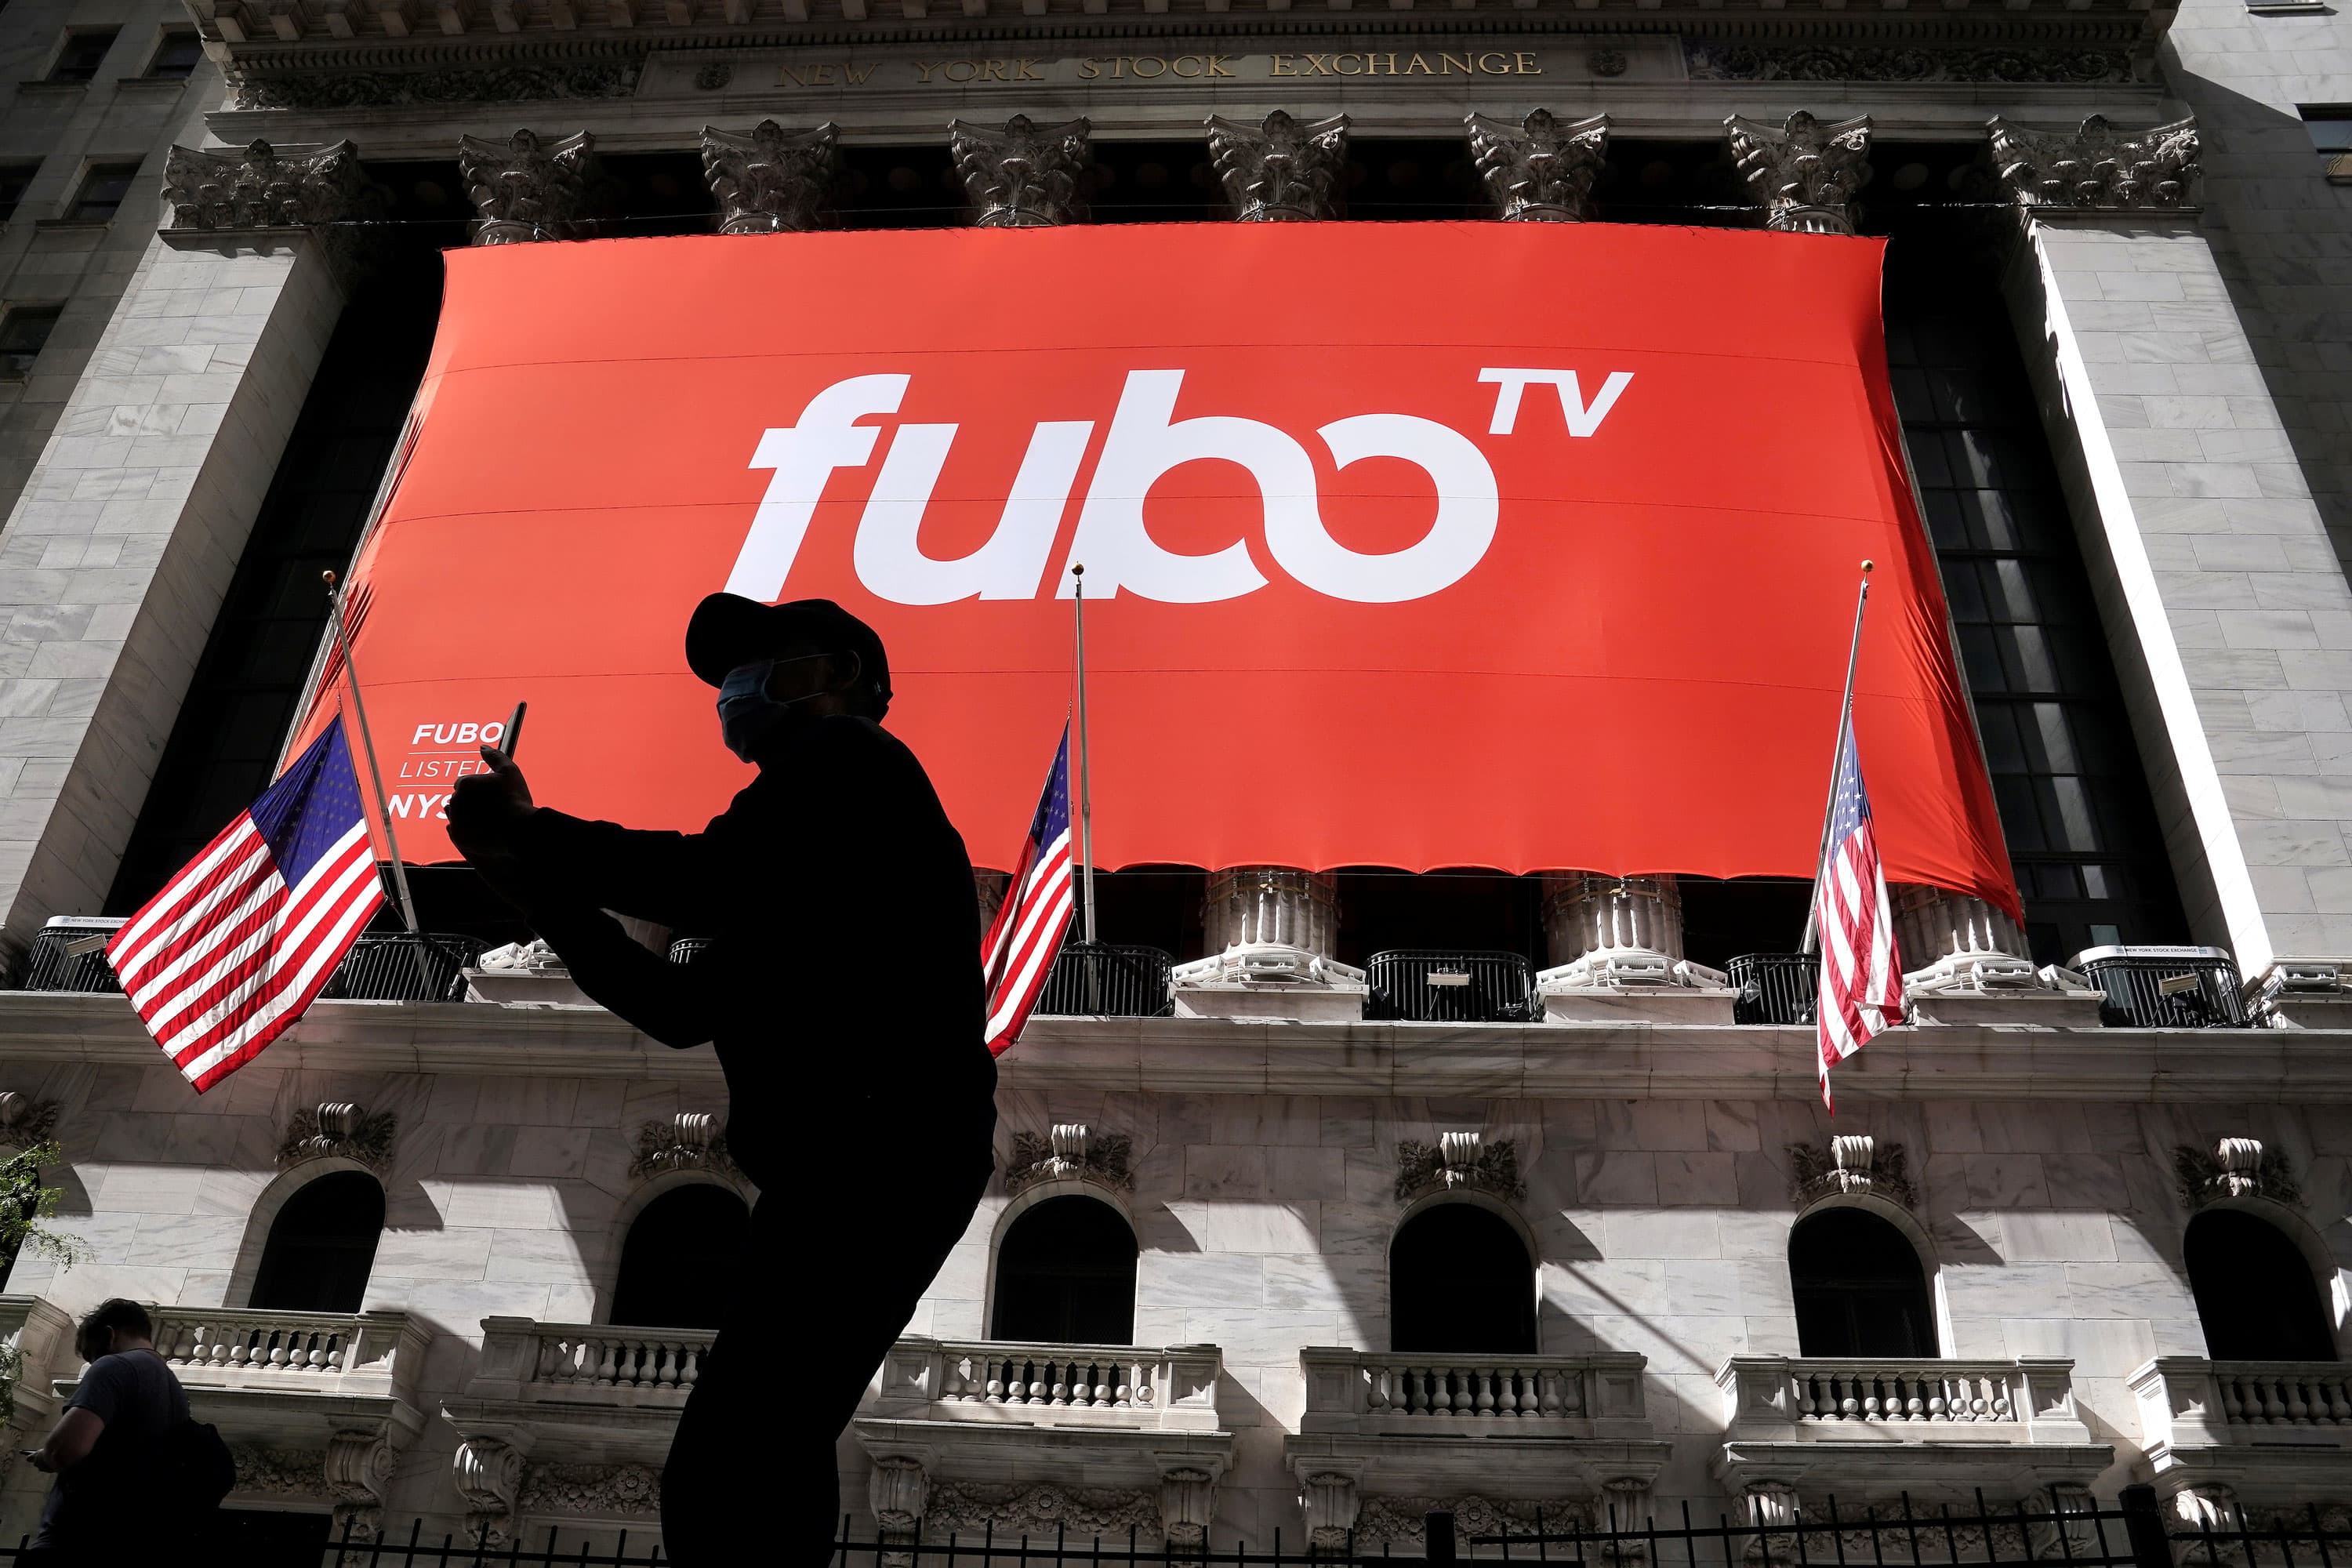 Stocks making the biggest moves after hours: fuboTV, Opendoor Technologies, Electronic Arts & more